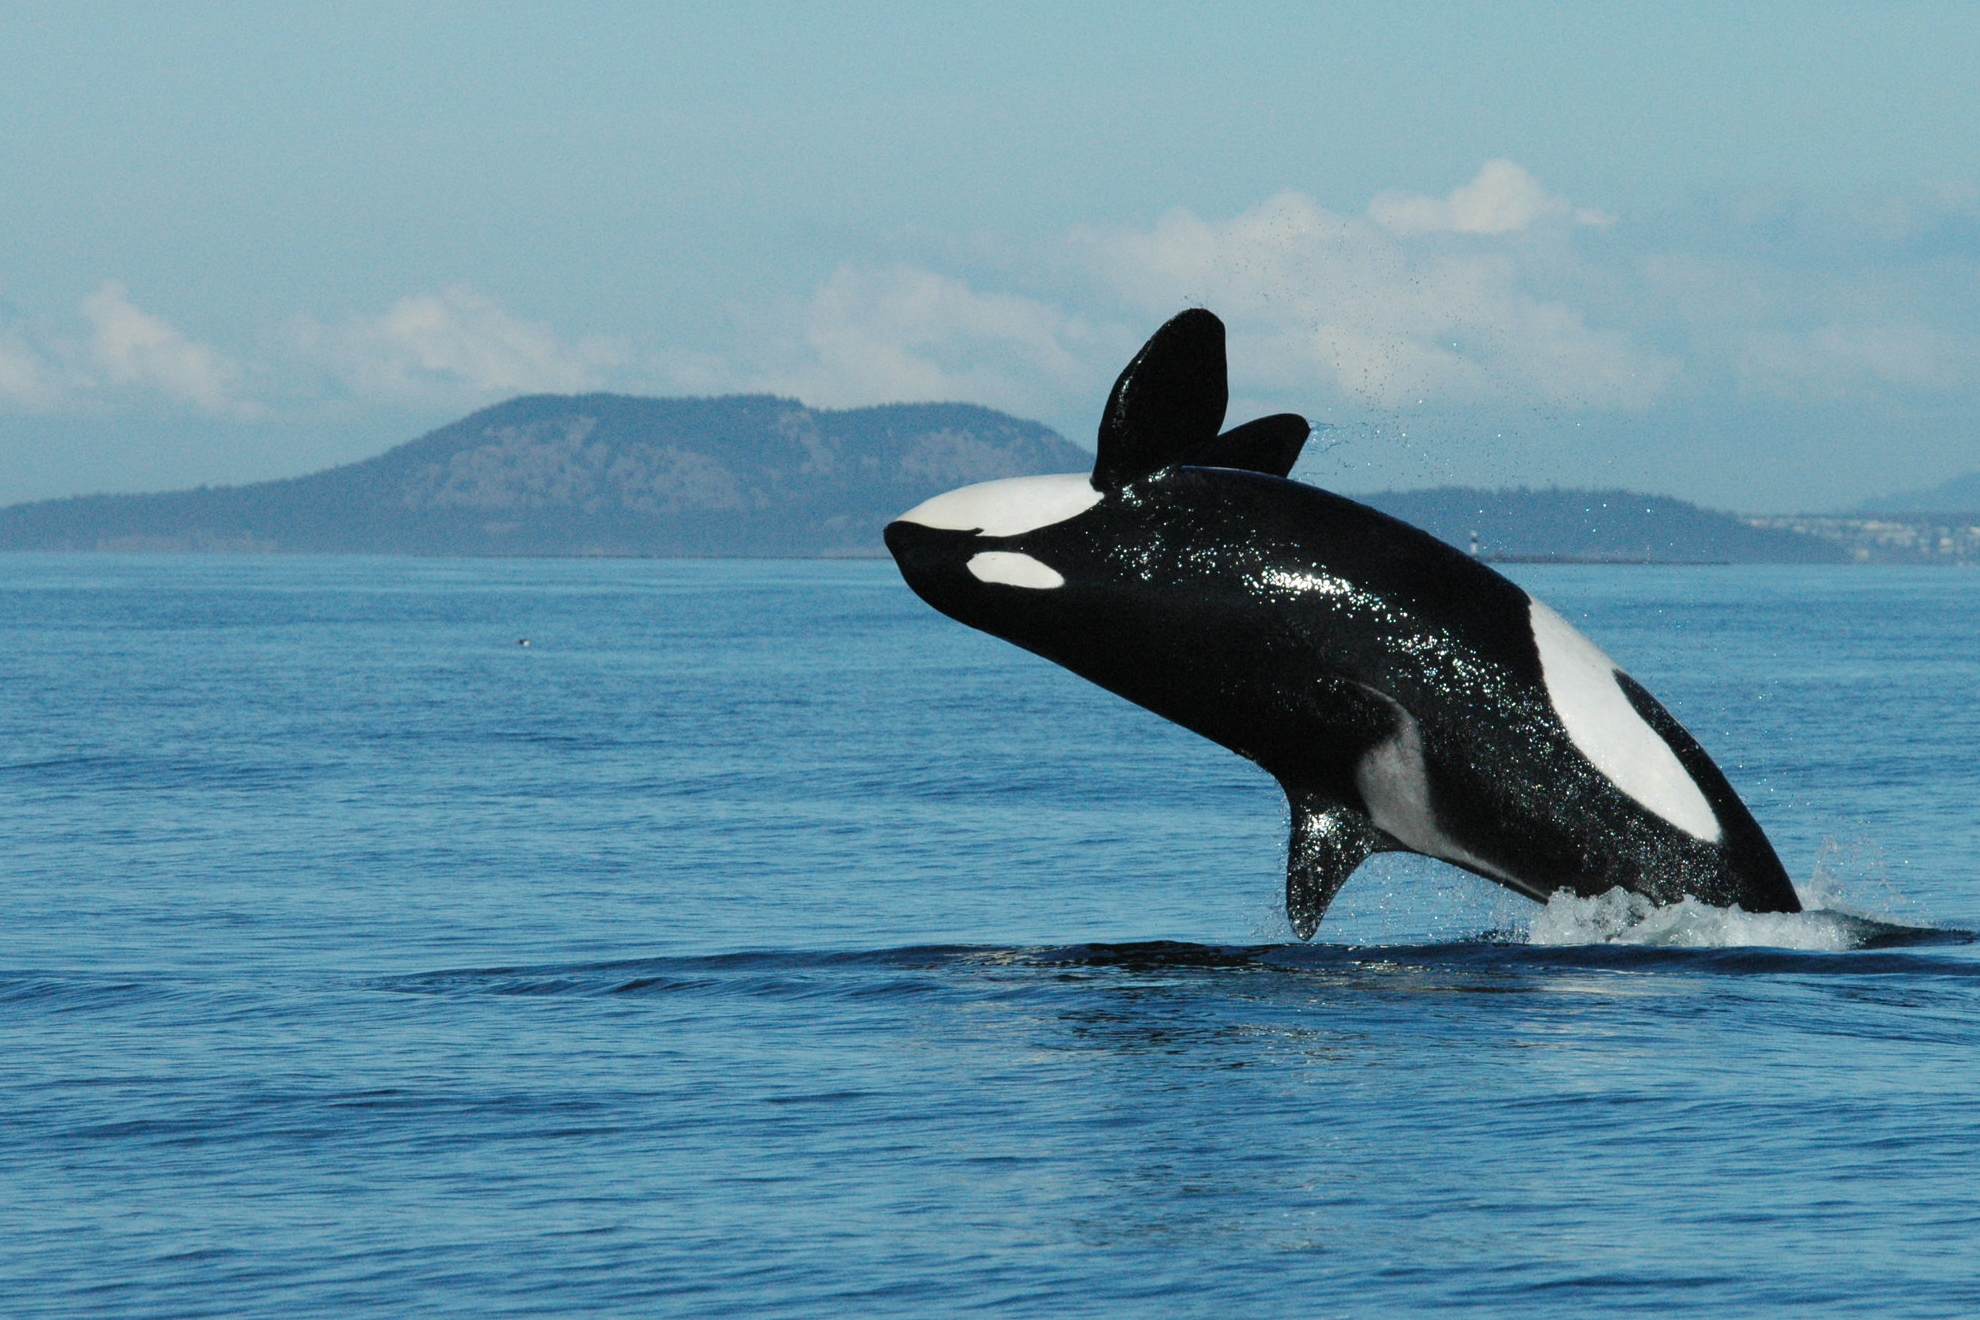 Incredible footage shows killer whale collide with dolphin in mid-air